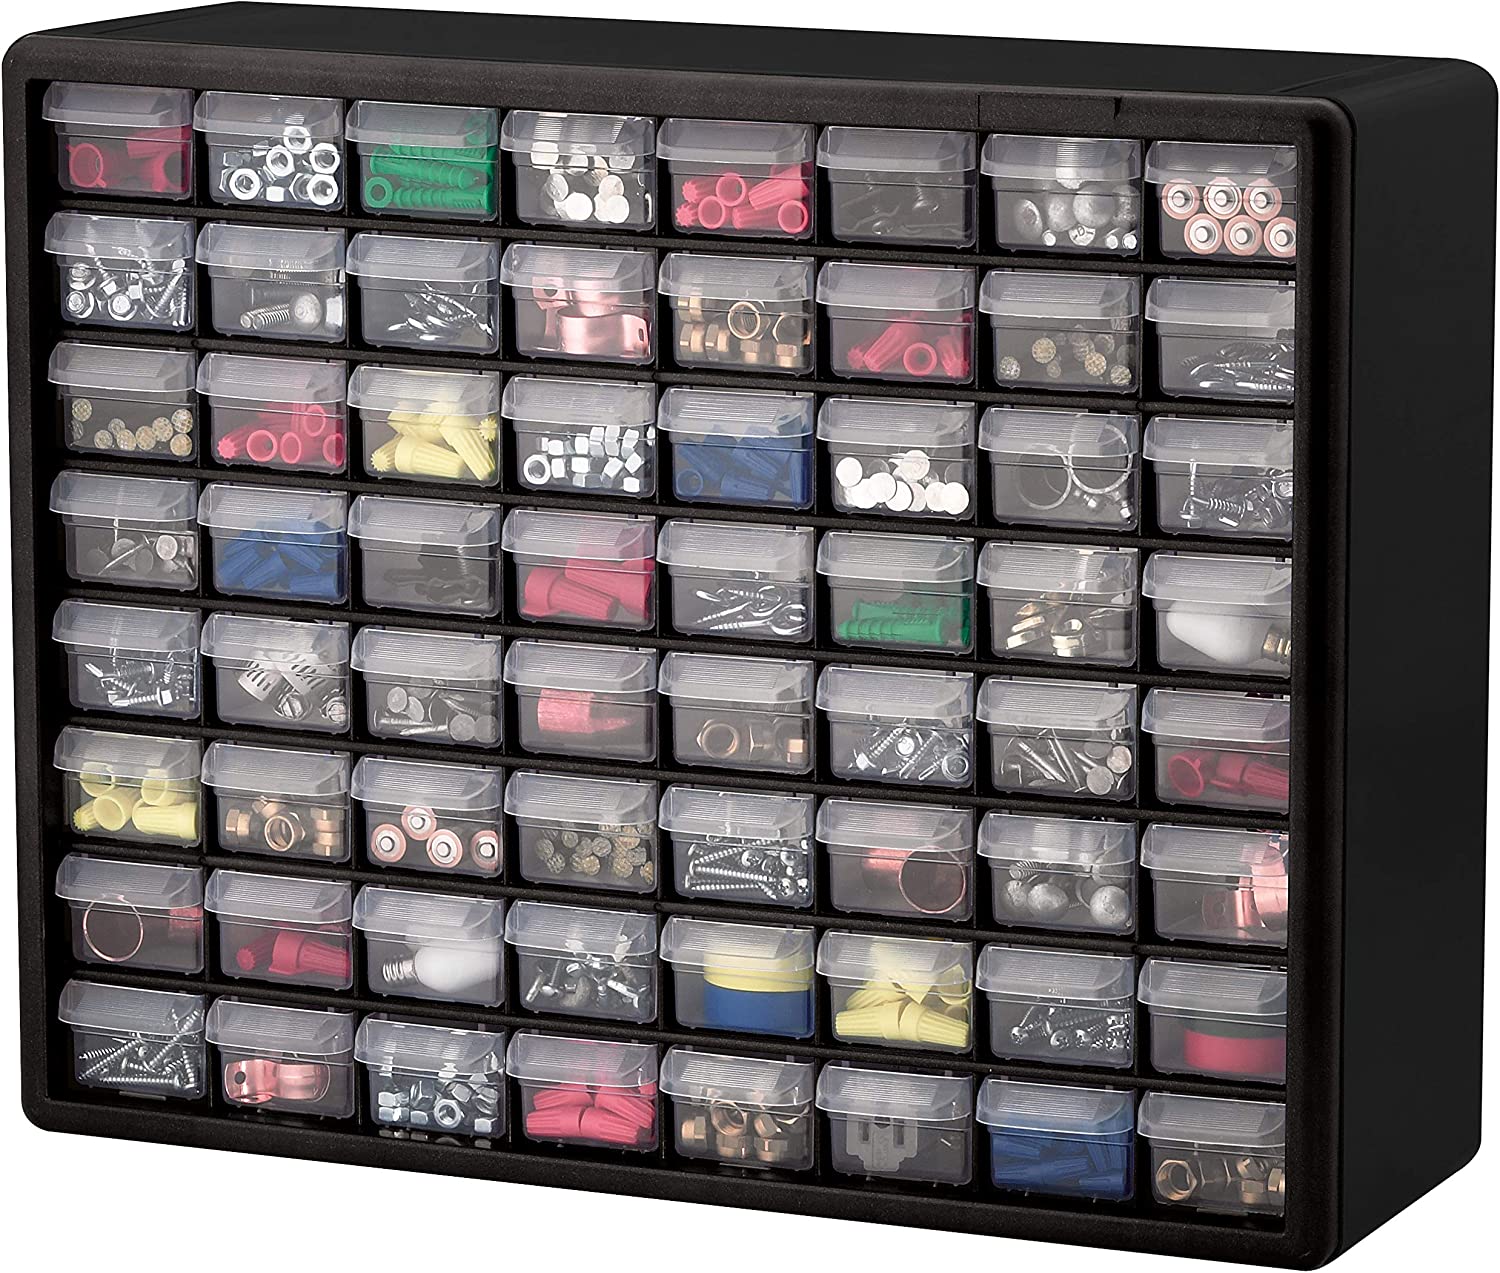 Akro-Mils 64 Drawer Plastic Cabinet Storage Organizer with Drawers for Hardware, Small Parts, Craft Supplies, Black - image 5 of 14